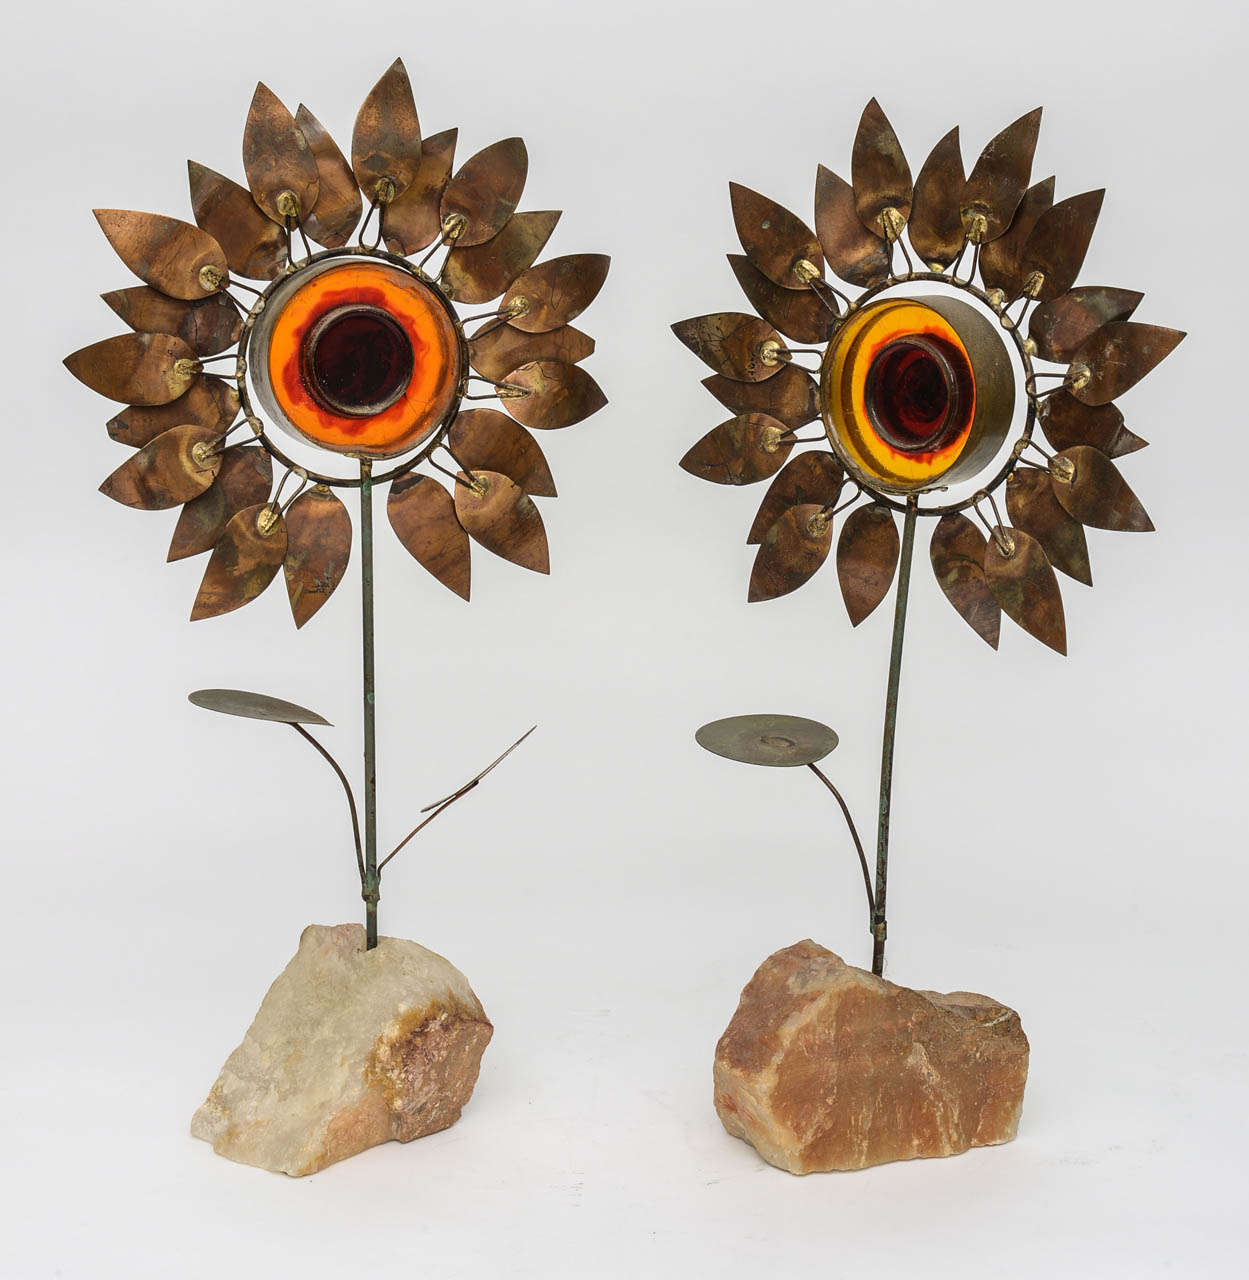 Unique and rare pair of brass and resin sunflowers by Curtis Jere, the California sculptor and designer.  Signed C. Jere 1968 on each of the pair of flowers.  The resin allows light to shine through and glow a brilliant orange color.